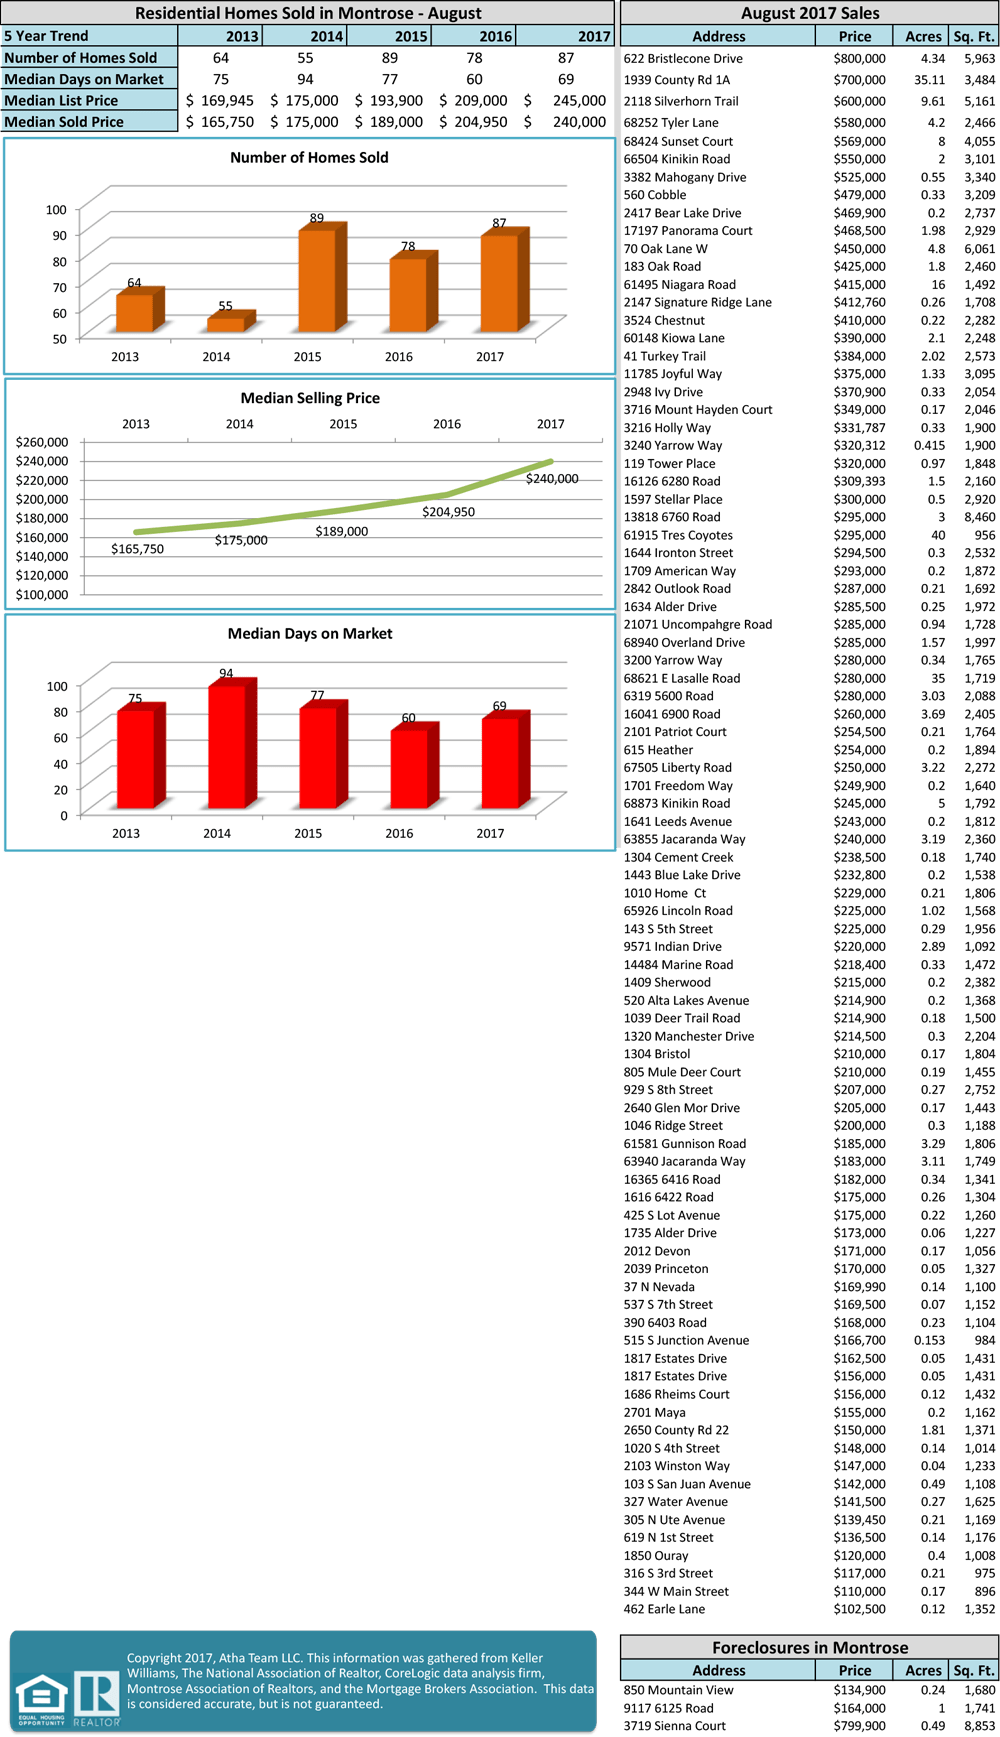 Monthly market stats for real estate market in Montrose, Colorado by the Atha Team